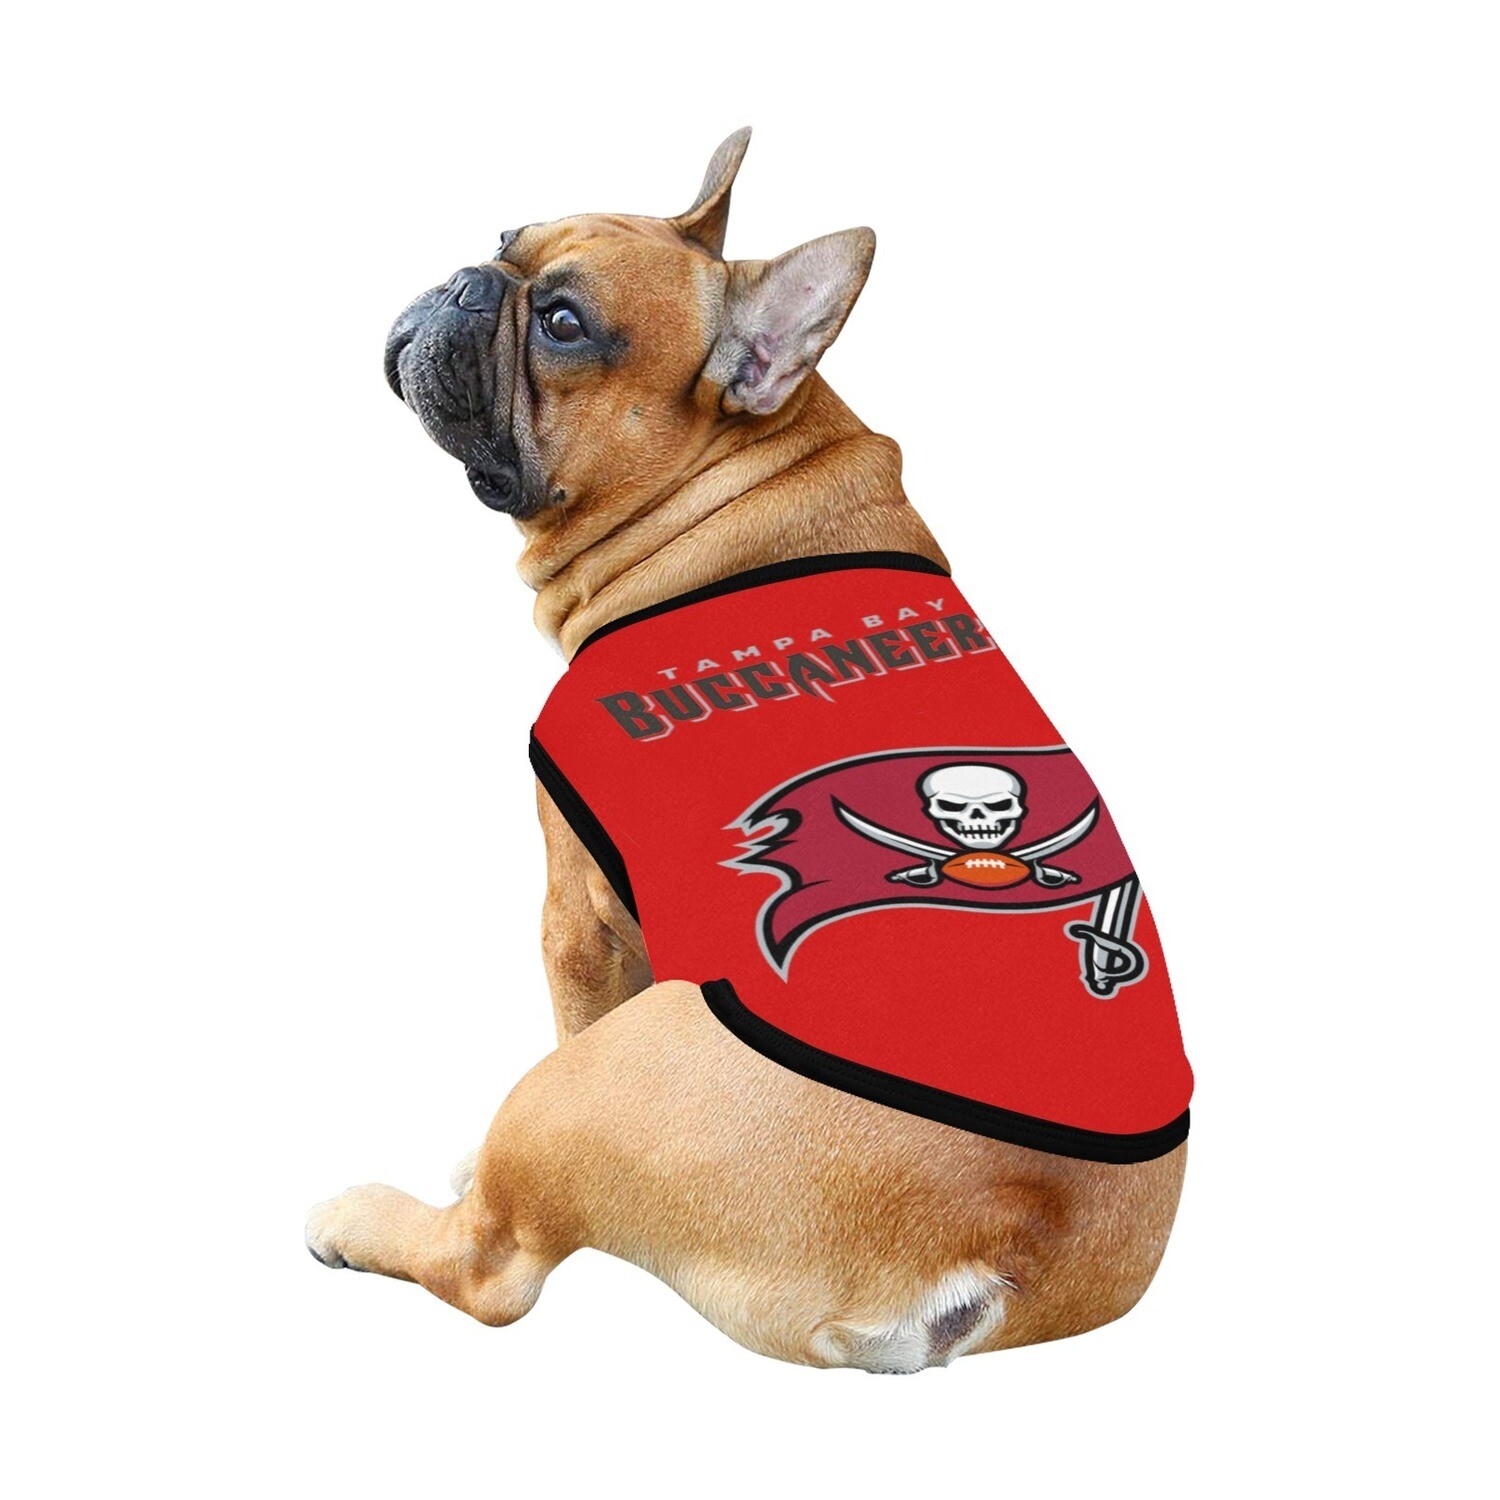 🐕 USA NFL Tampa Bay Buccaneers Dog t-shirt, Dog Tank Top, Dog shirt, Dog clothes, Gifts, front back print, 7 sizes XS to 3XL, red